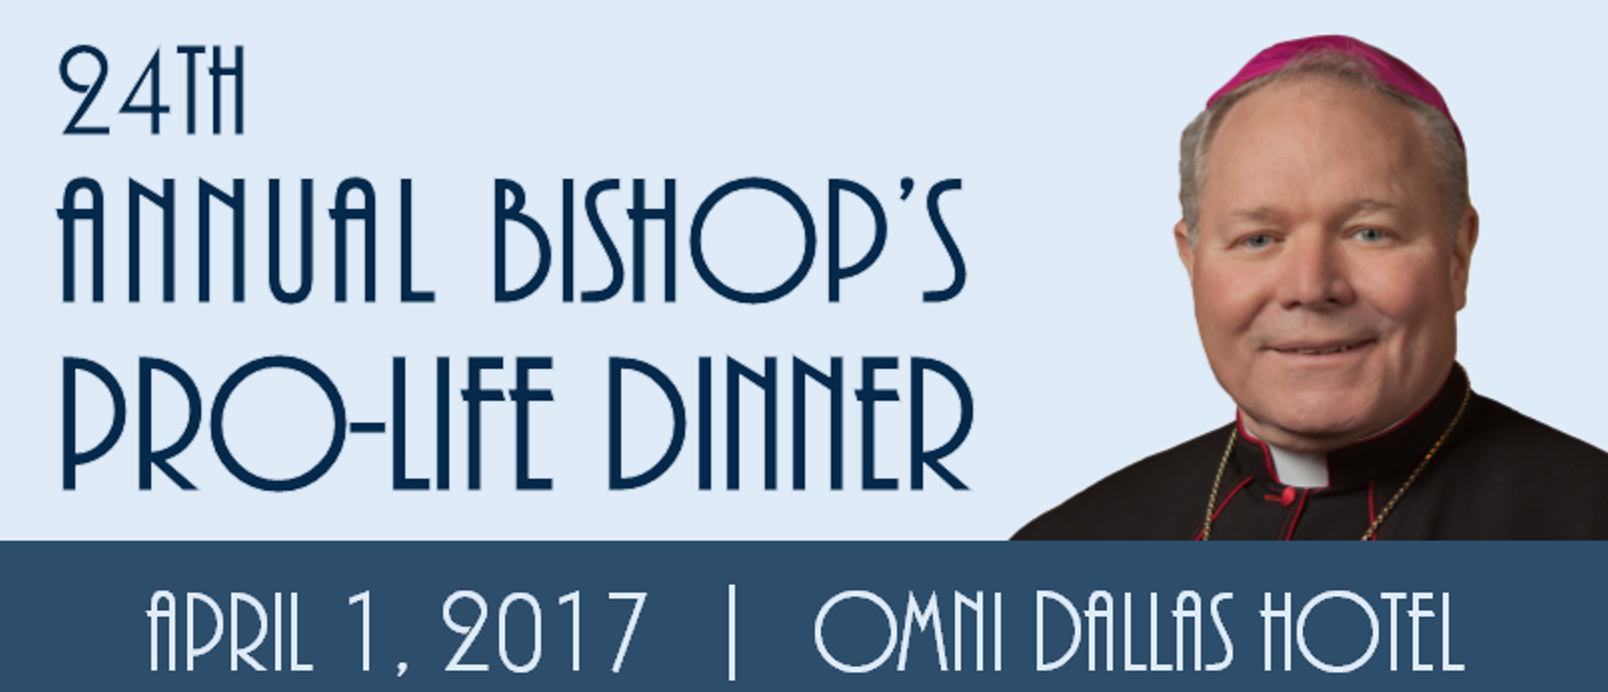 24th Annual Bishop's Pro-Life Dinner